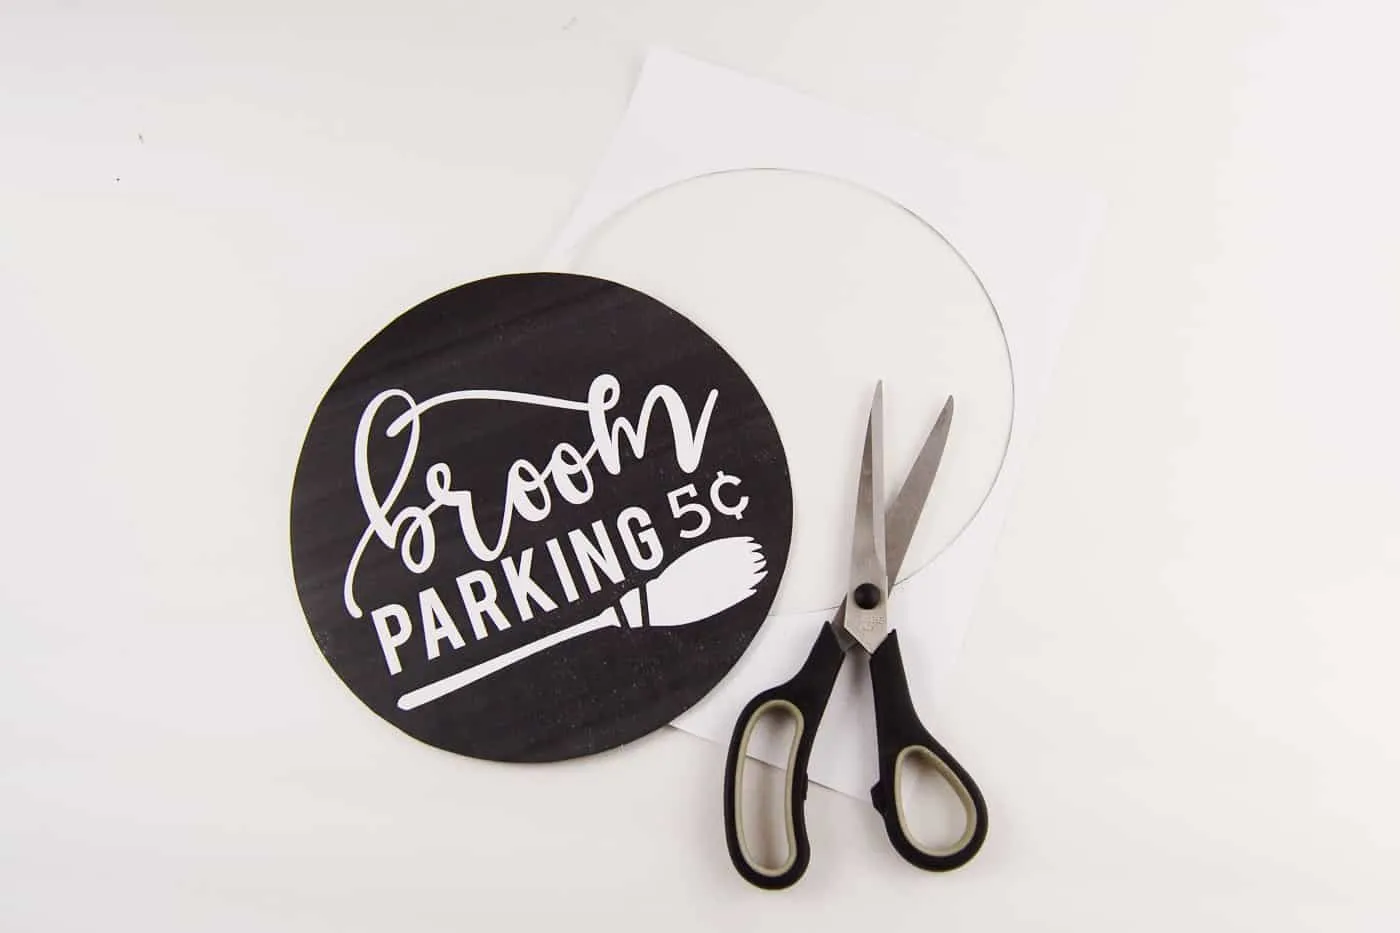 Broom parking printable cut out with a pair of scissors